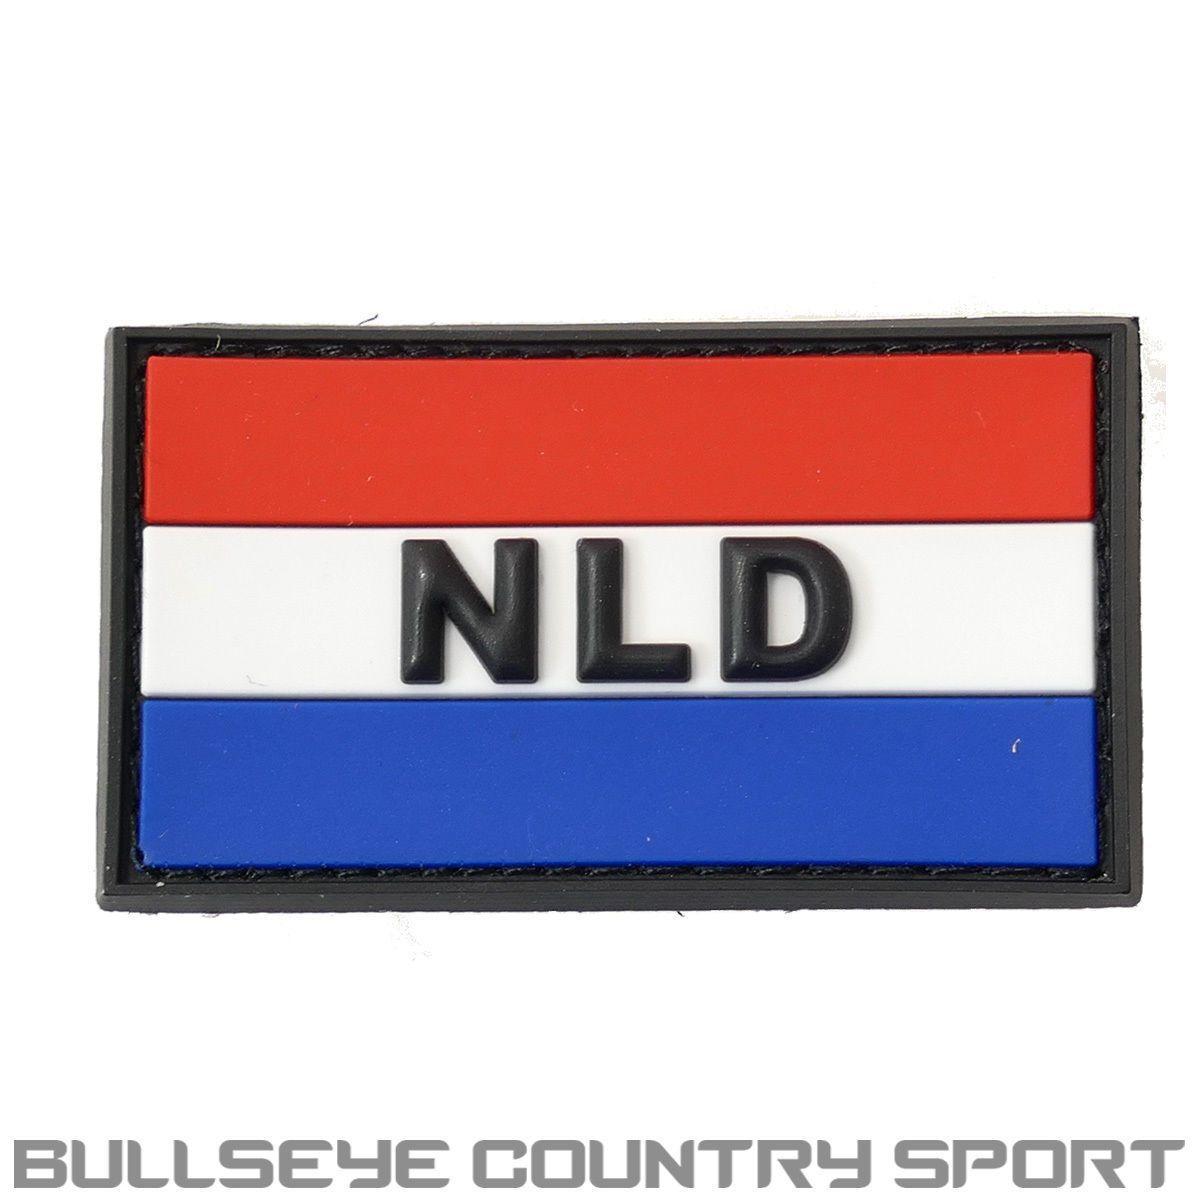 White and Blue Rectangle Logo - PVC RUBBER MORAL PATCH NETHERLANDS FLAG RED WHITE BLUE AIRSOFT VELCRO